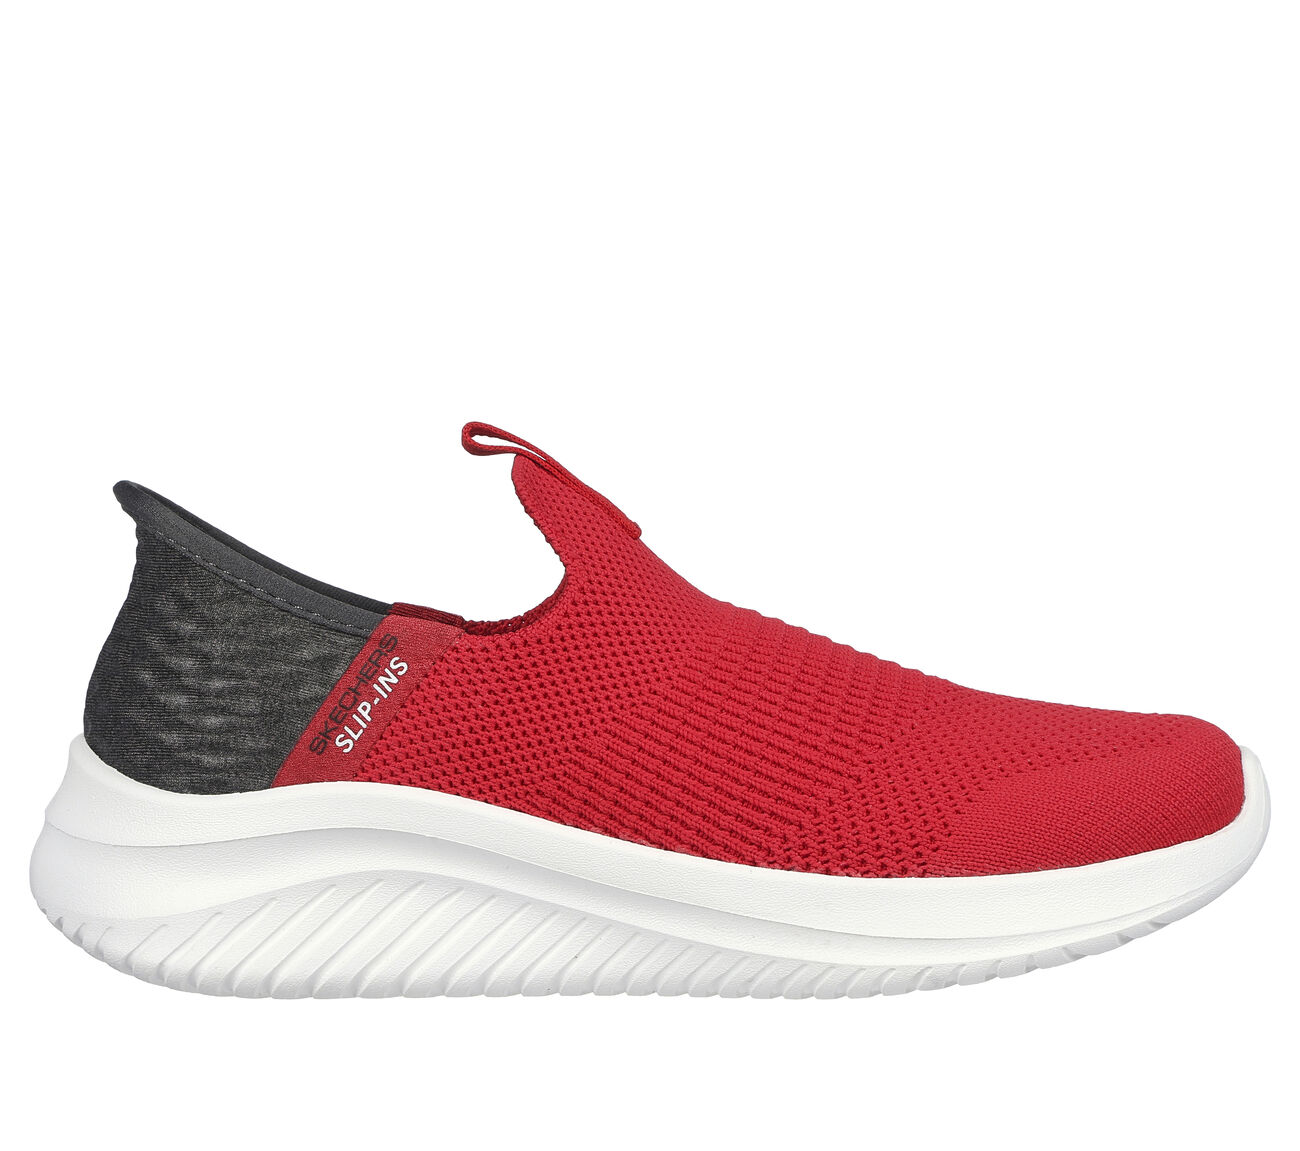 Shop RED Boys' Shoes | SKECHERS